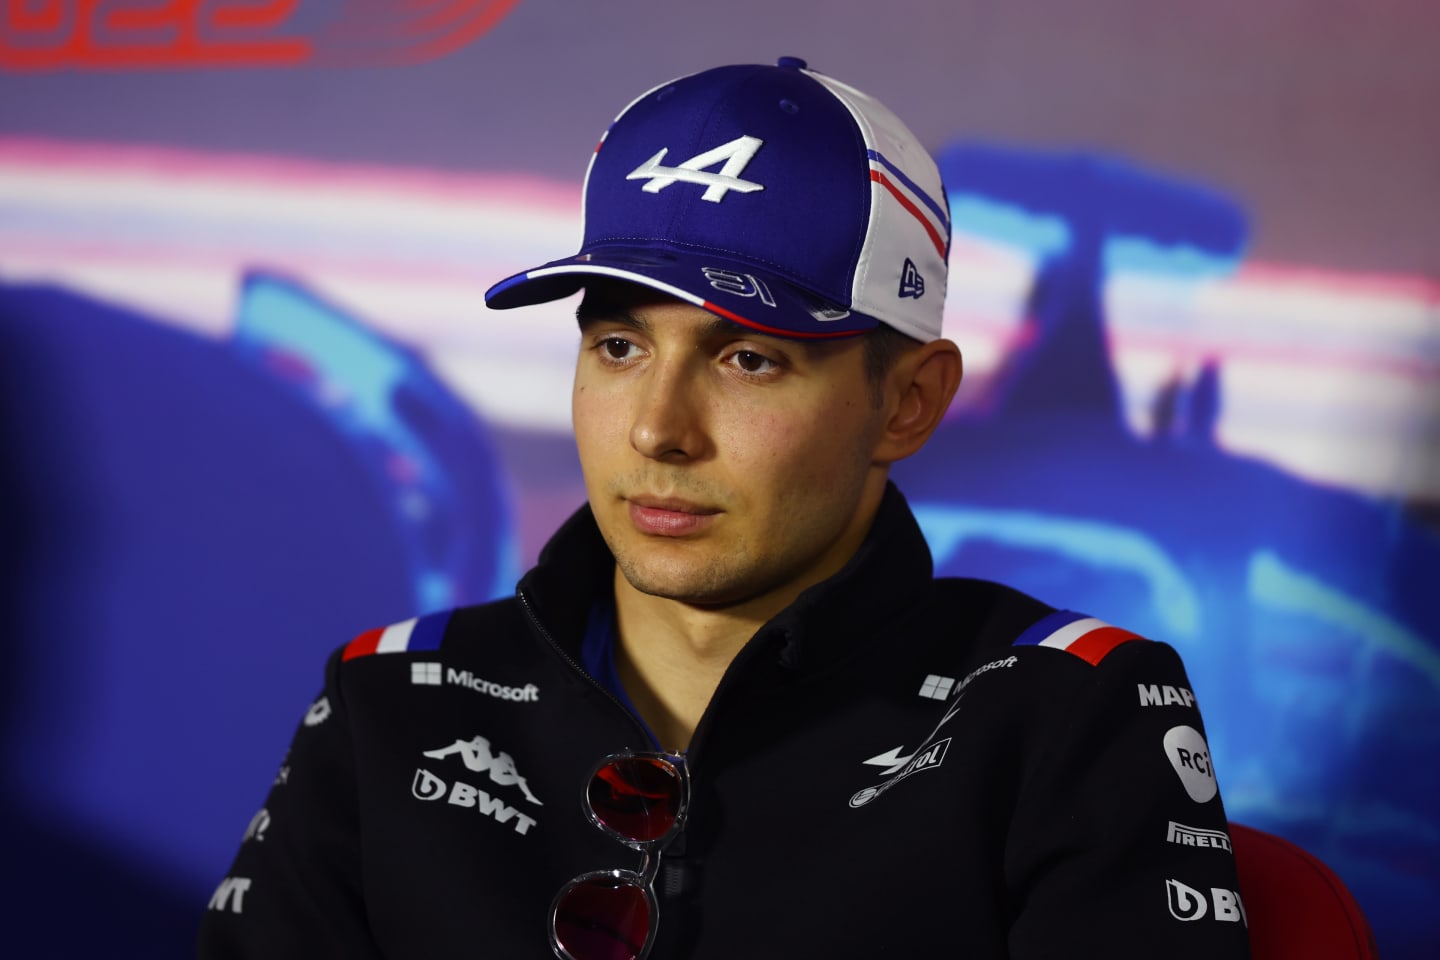 ZANDVOORT, NETHERLANDS - SEPTEMBER 01: Esteban Ocon of France and Alpine F1 looks on in the Drivers Press Conference during previews ahead of the F1 Grand Prix of The Netherlands at Circuit Zandvoort on September 01, 2022 in Zandvoort, Netherlands. (Photo by Lars Baron/Getty Images)